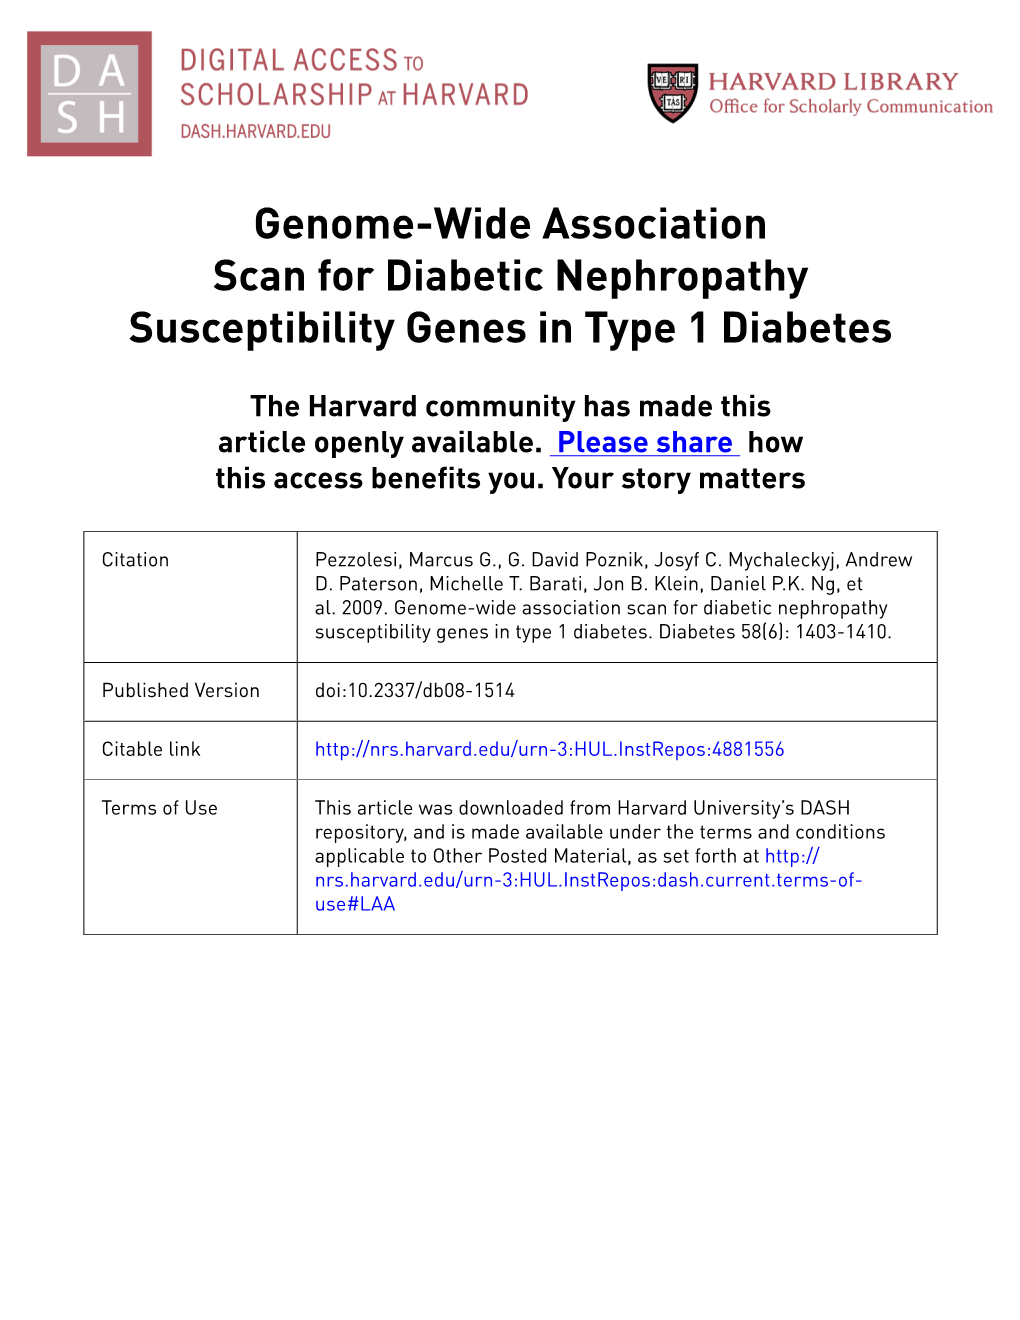 Genome-Wide Association Scan for Diabetic Nephropathy Susceptibility Genes in Type 1 Diabetes